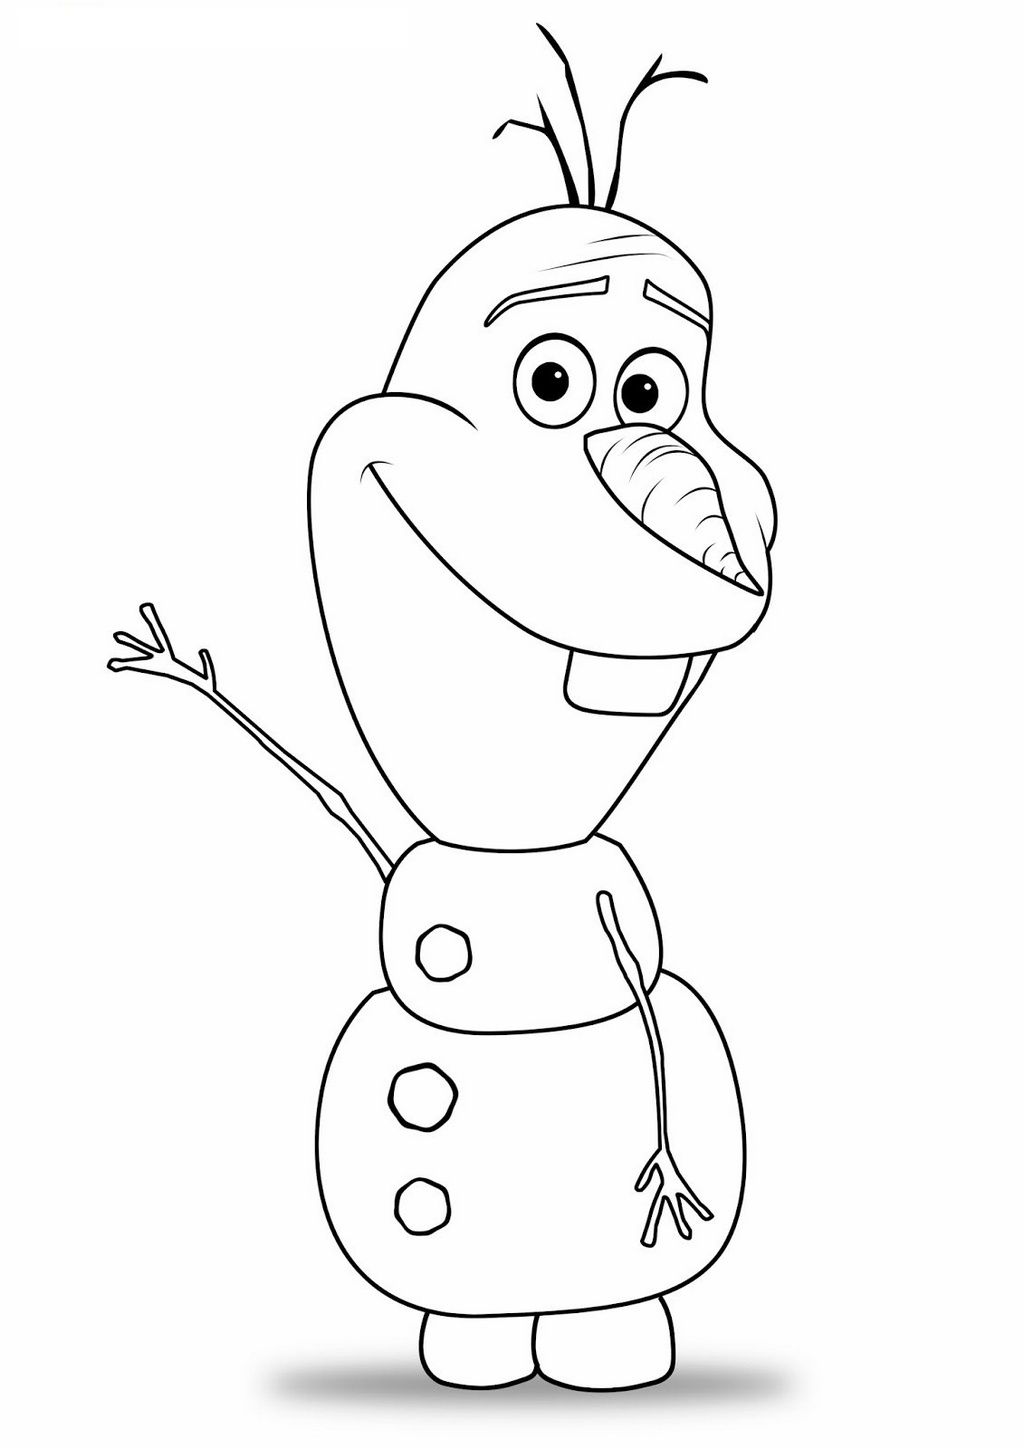 Cheerful Disney Frozen Olaf Coloring Pages Coloring Pages